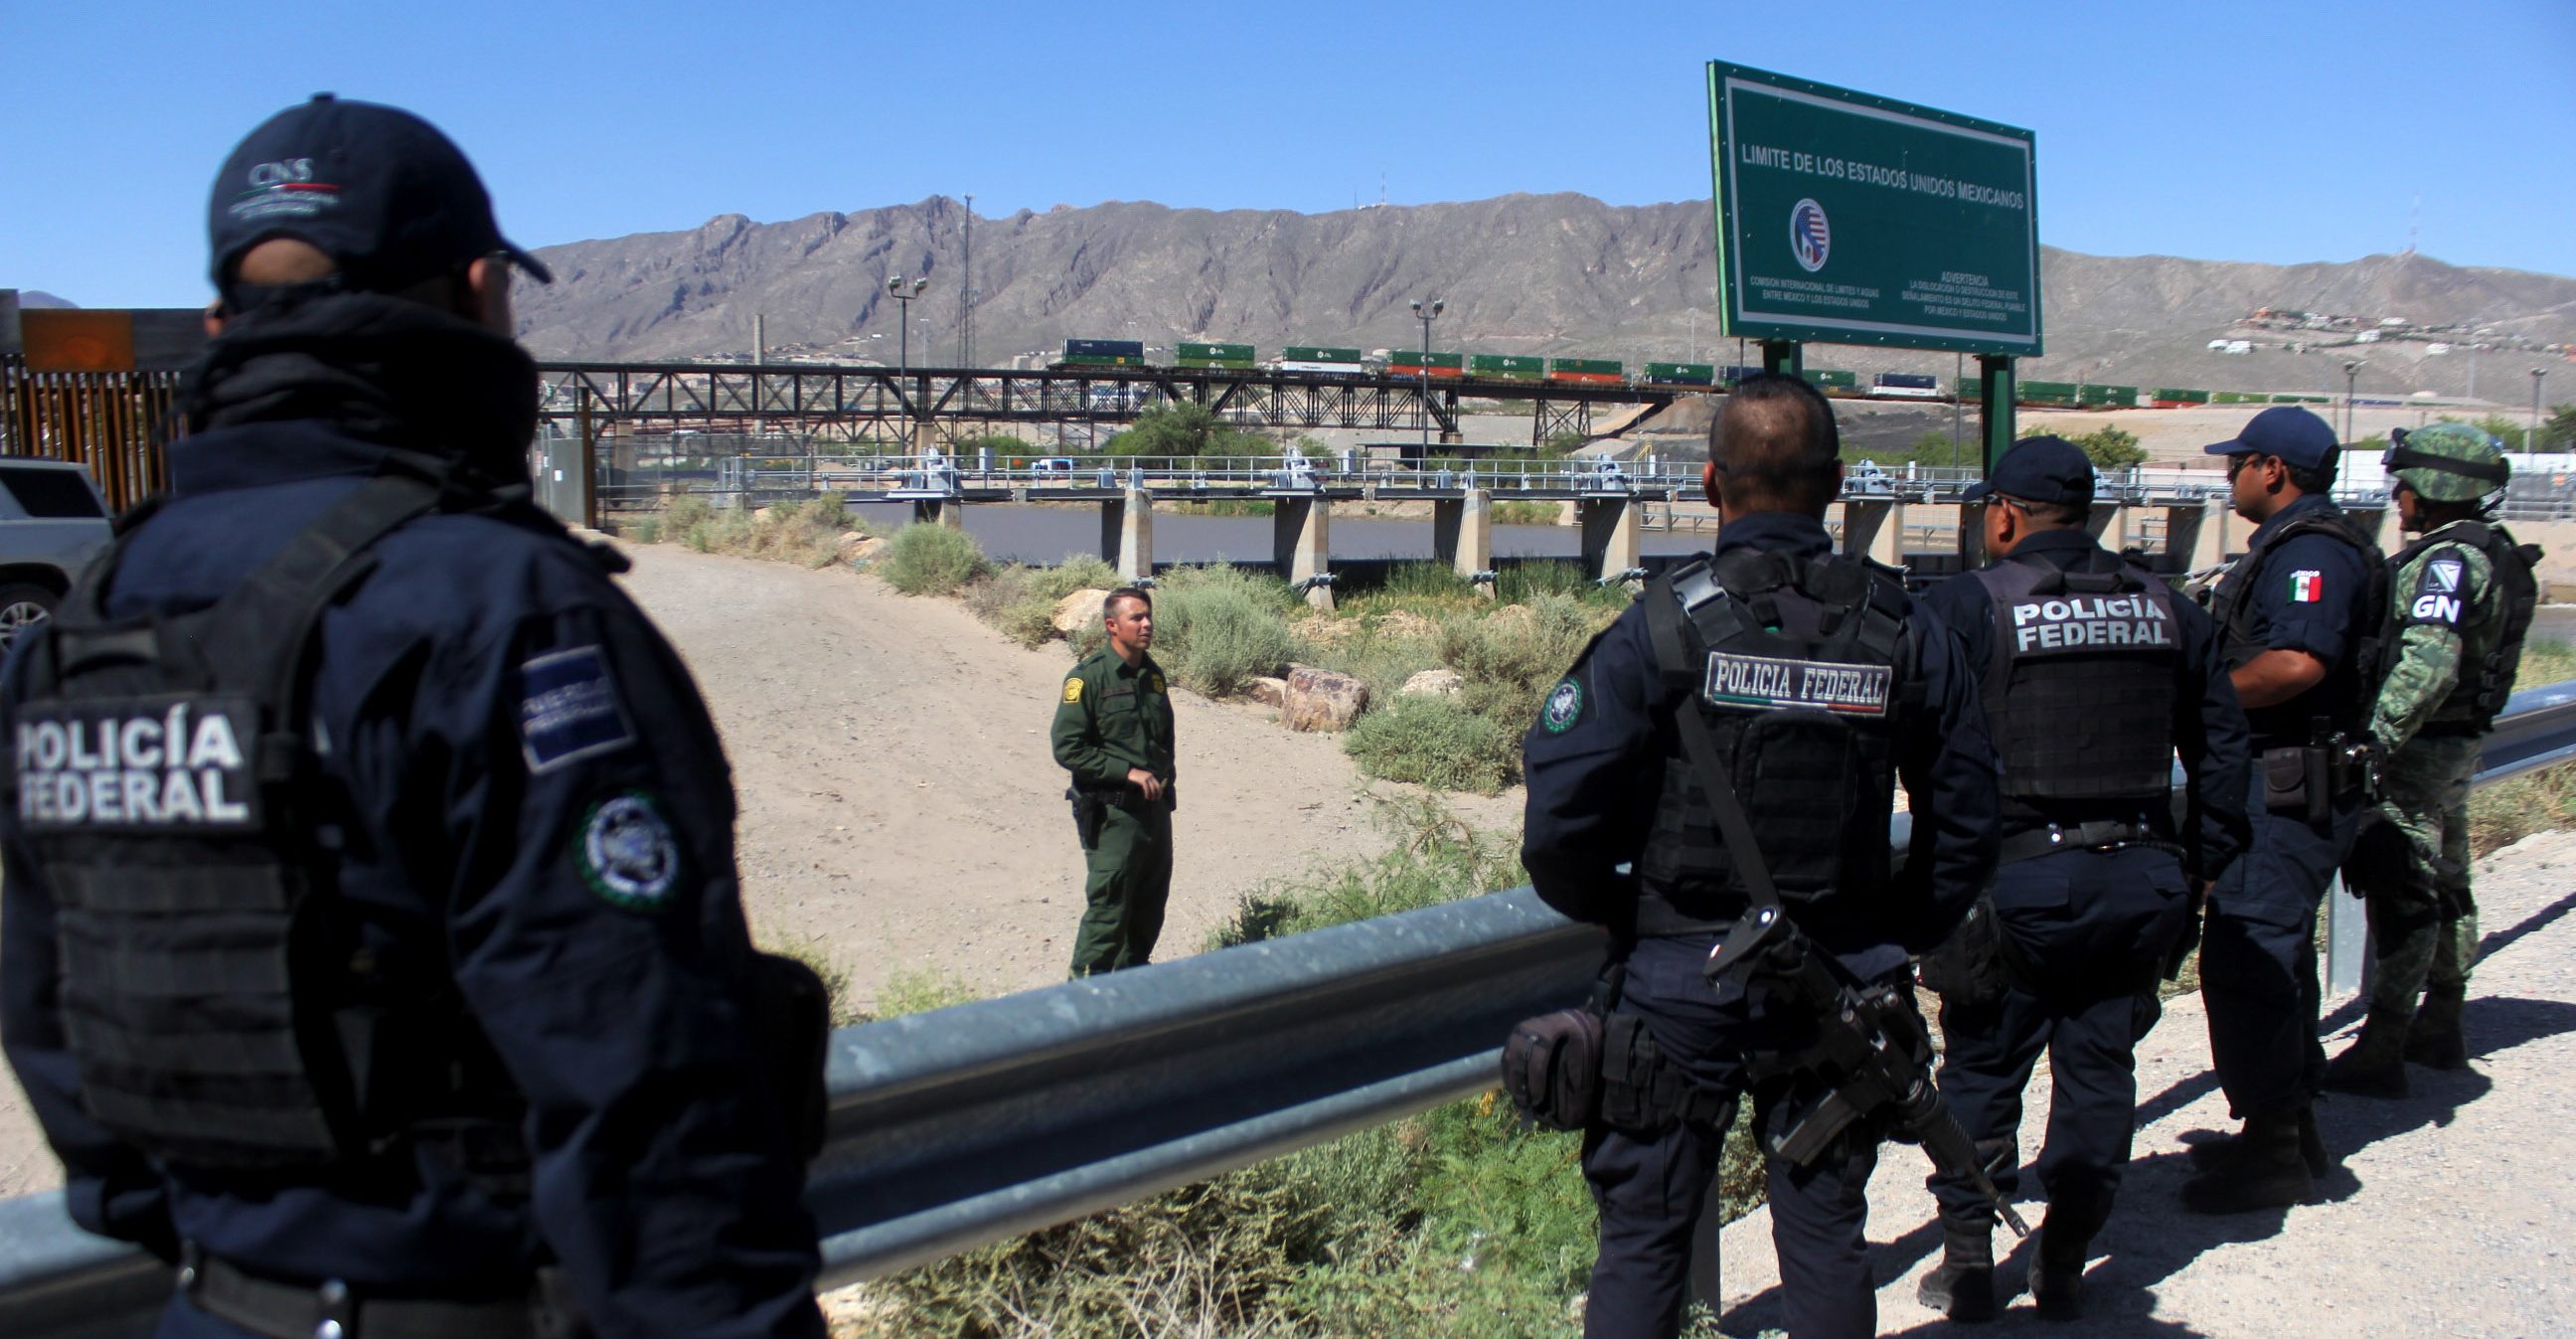 15 thousand guard elements to prevent crossing migrants to US